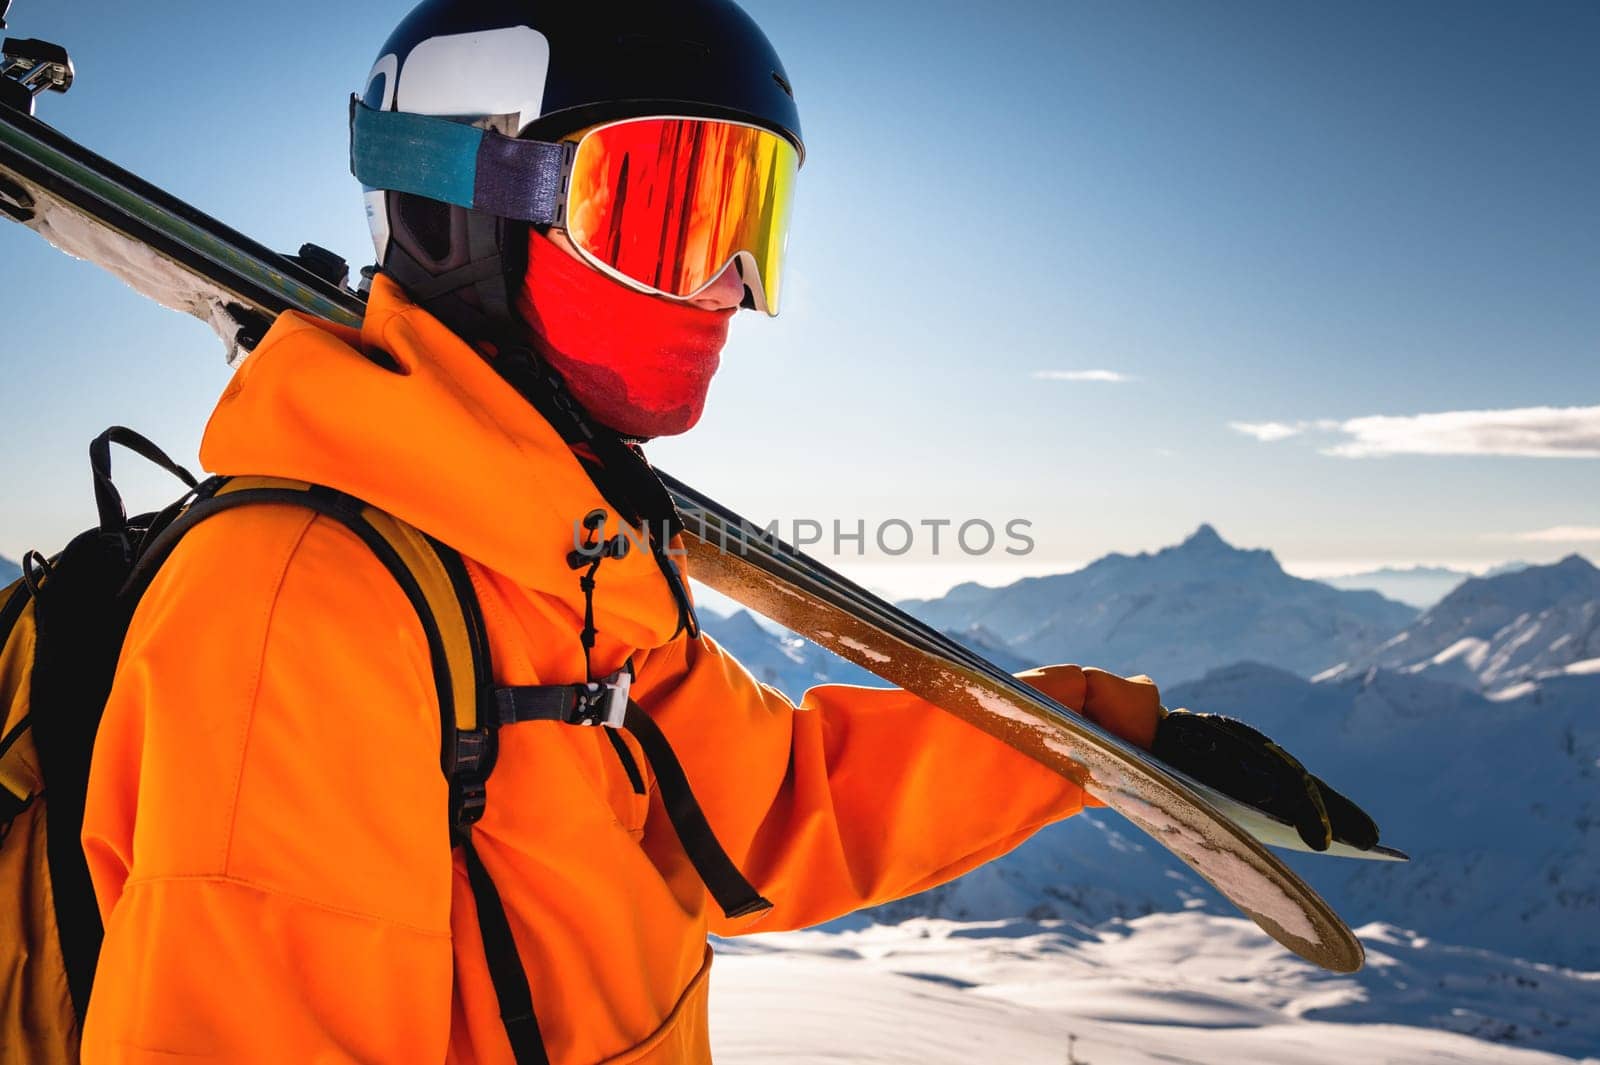 shot of a skier standing on top of a mountain with skis on his shoulder on a sunny winter day, sunlight, outdoor recreation, skiing, lifestyle, downhill sport concept by yanik88